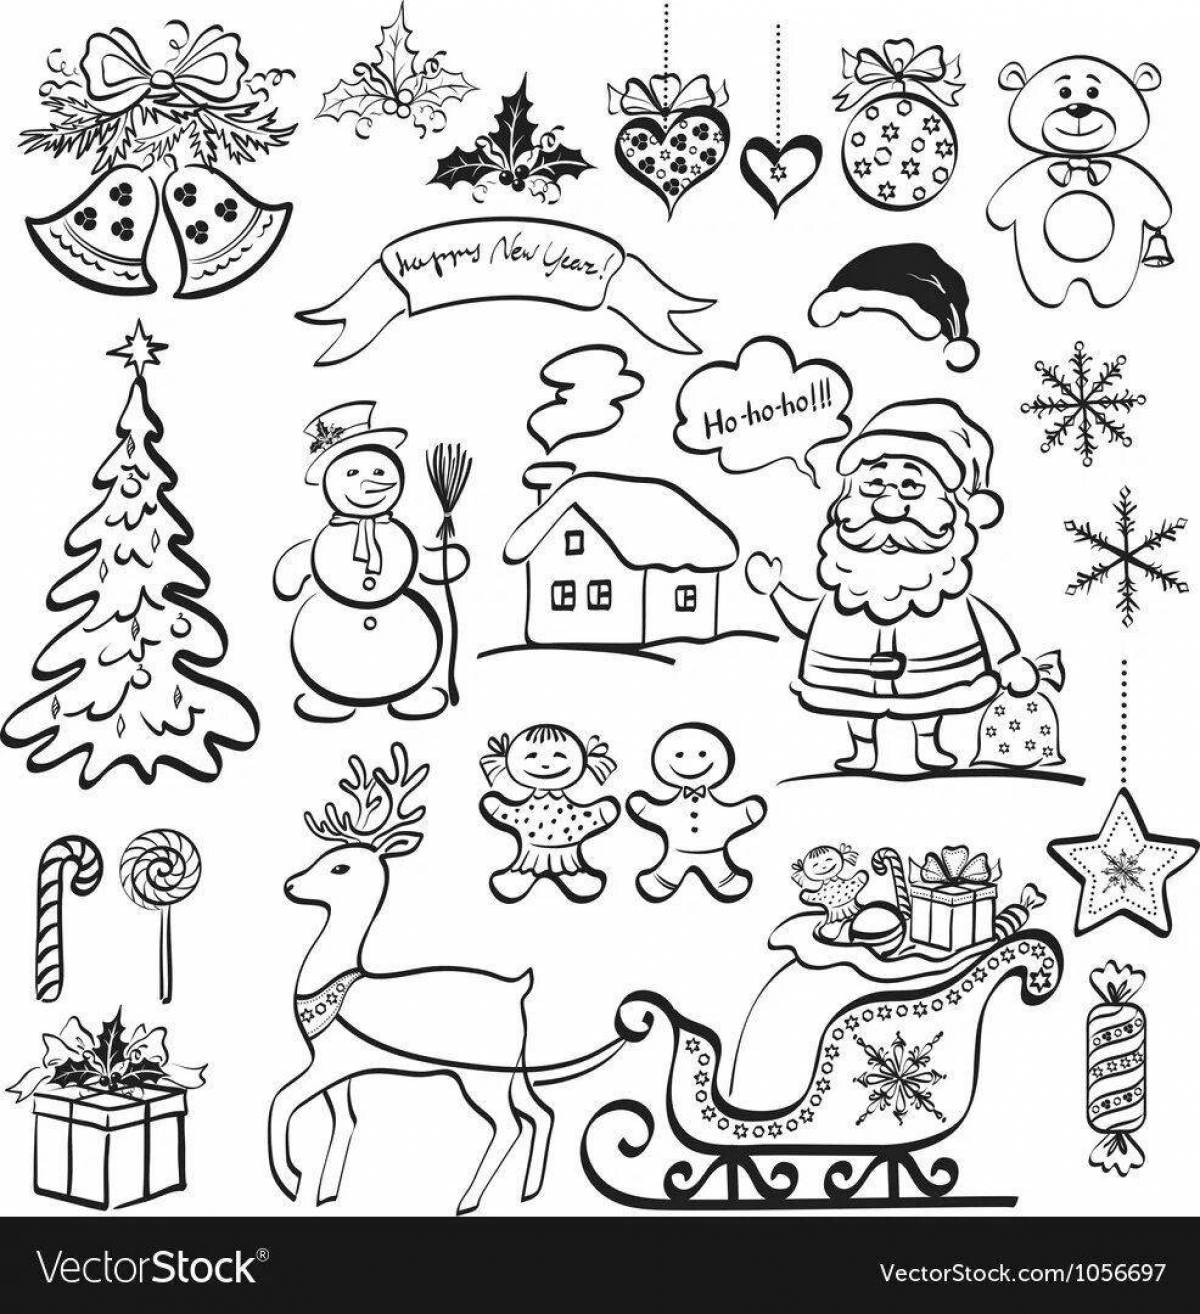 Dazzling coloring Christmas stickers